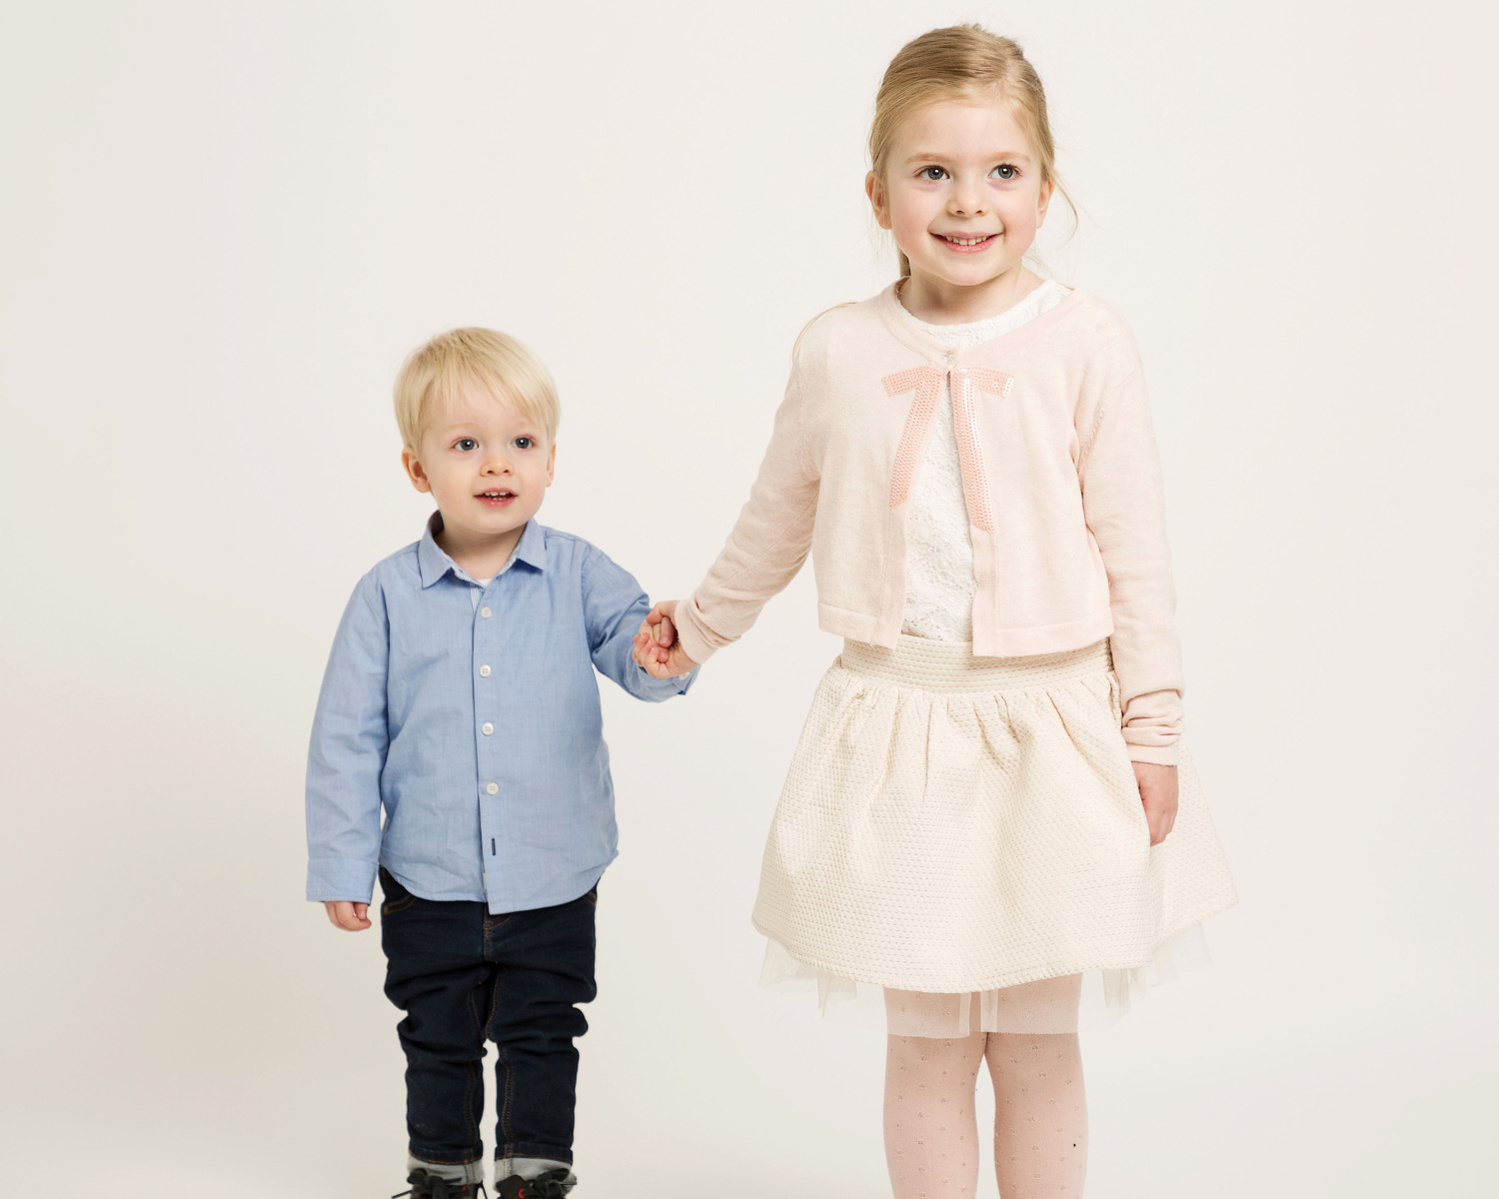 Professional studio portrait of young children, brother and sister holding hands in family photography studio 